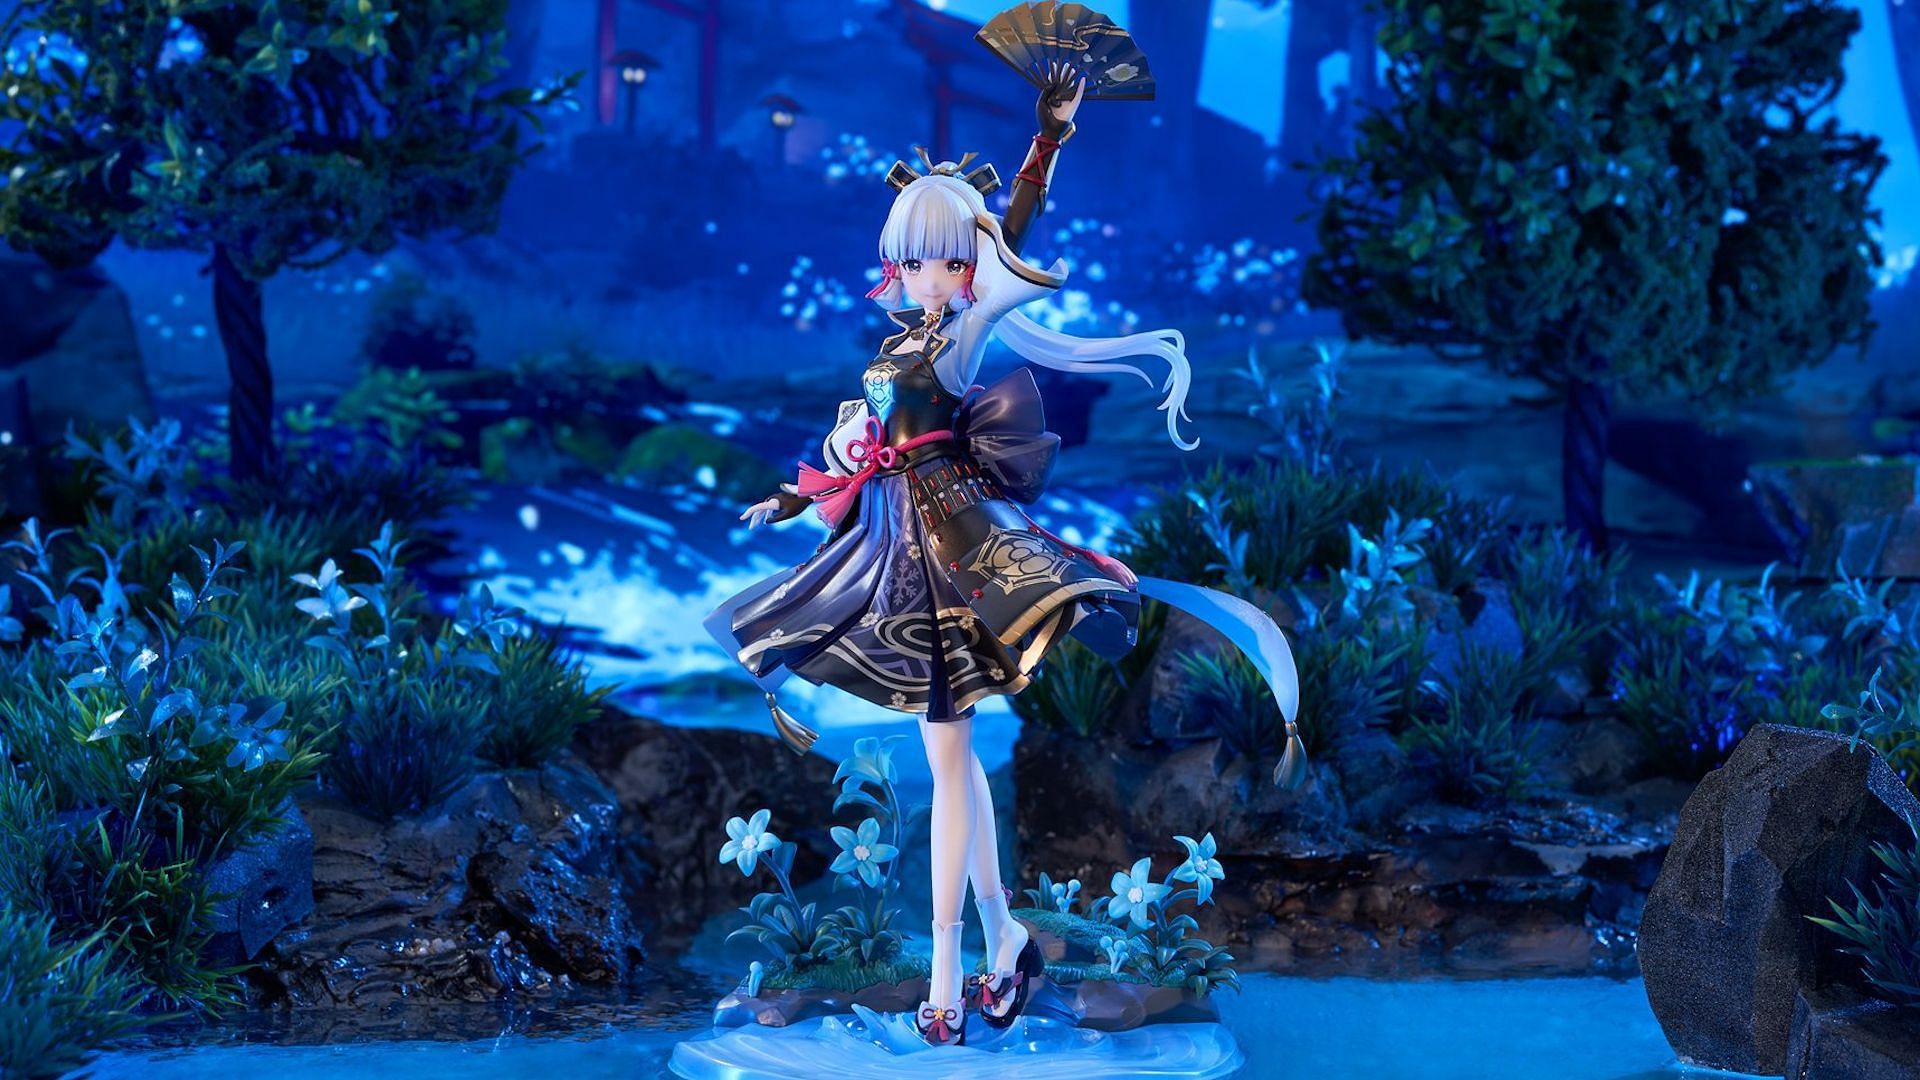 Another photo of the full Ayaka figure (Image via Apex Store, HoYoverse)